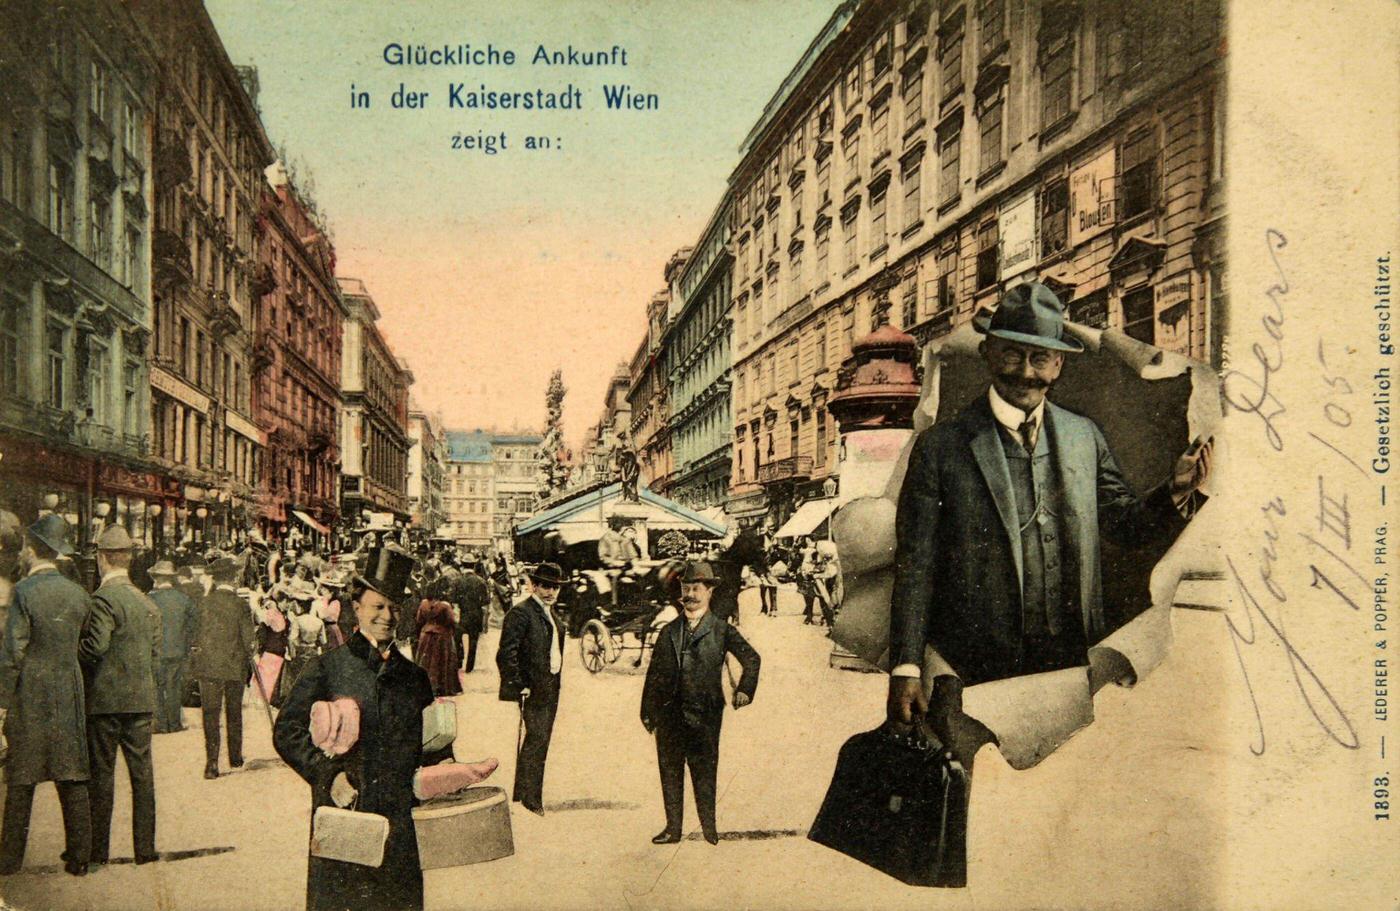 Vienna with mounted accessories, indicating "Happy arrival in the imperial city of Vienna" from 1905.